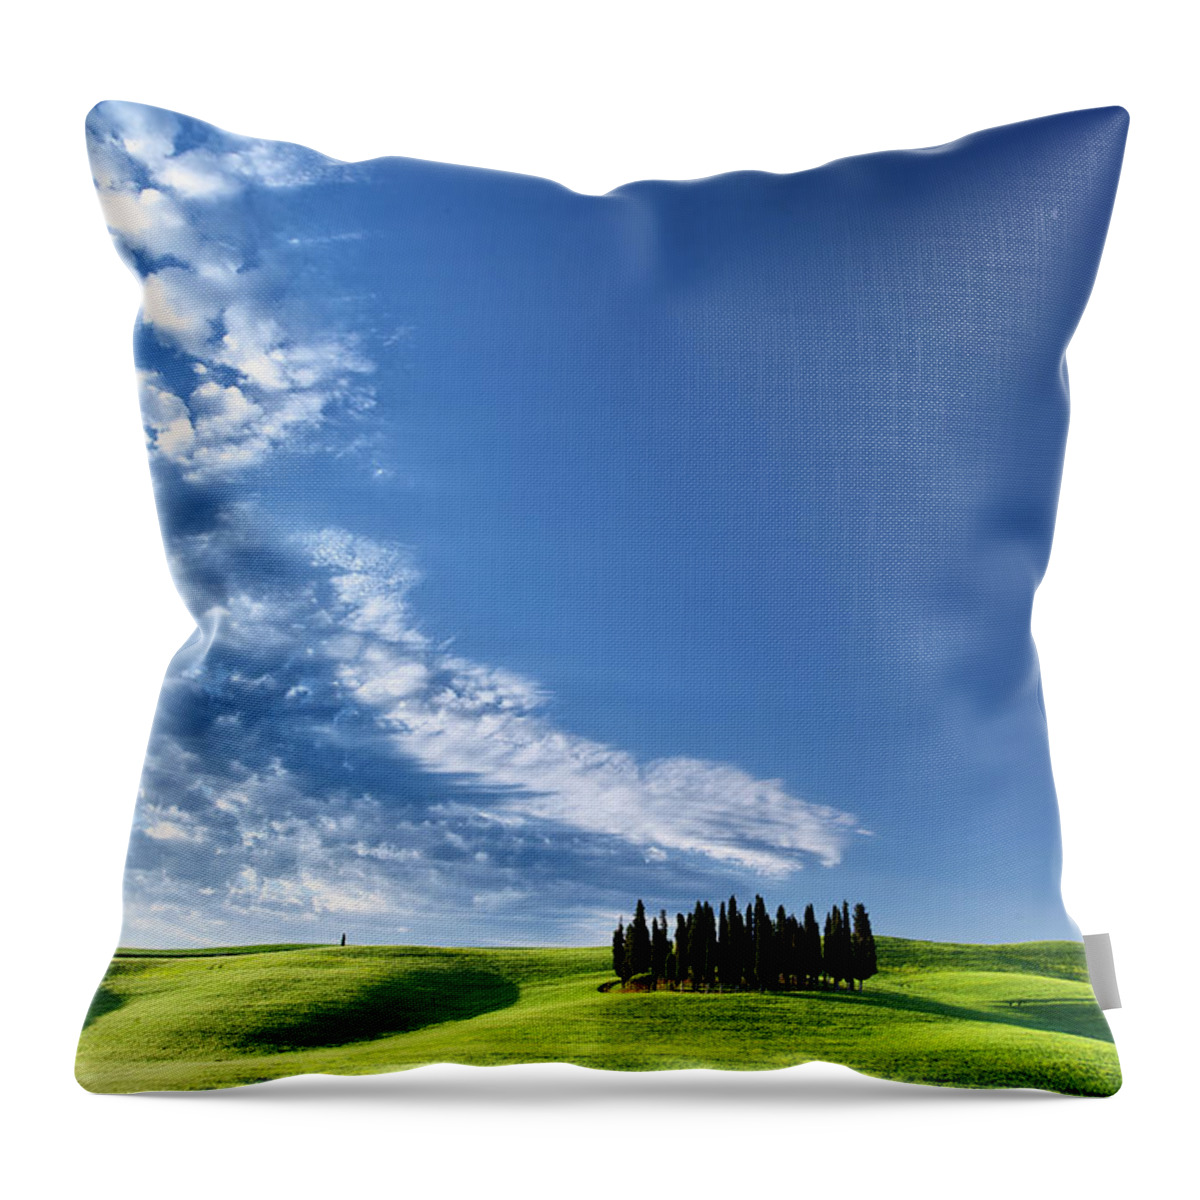 Scenics Throw Pillow featuring the photograph Cypress Trees by Manolo Raggi